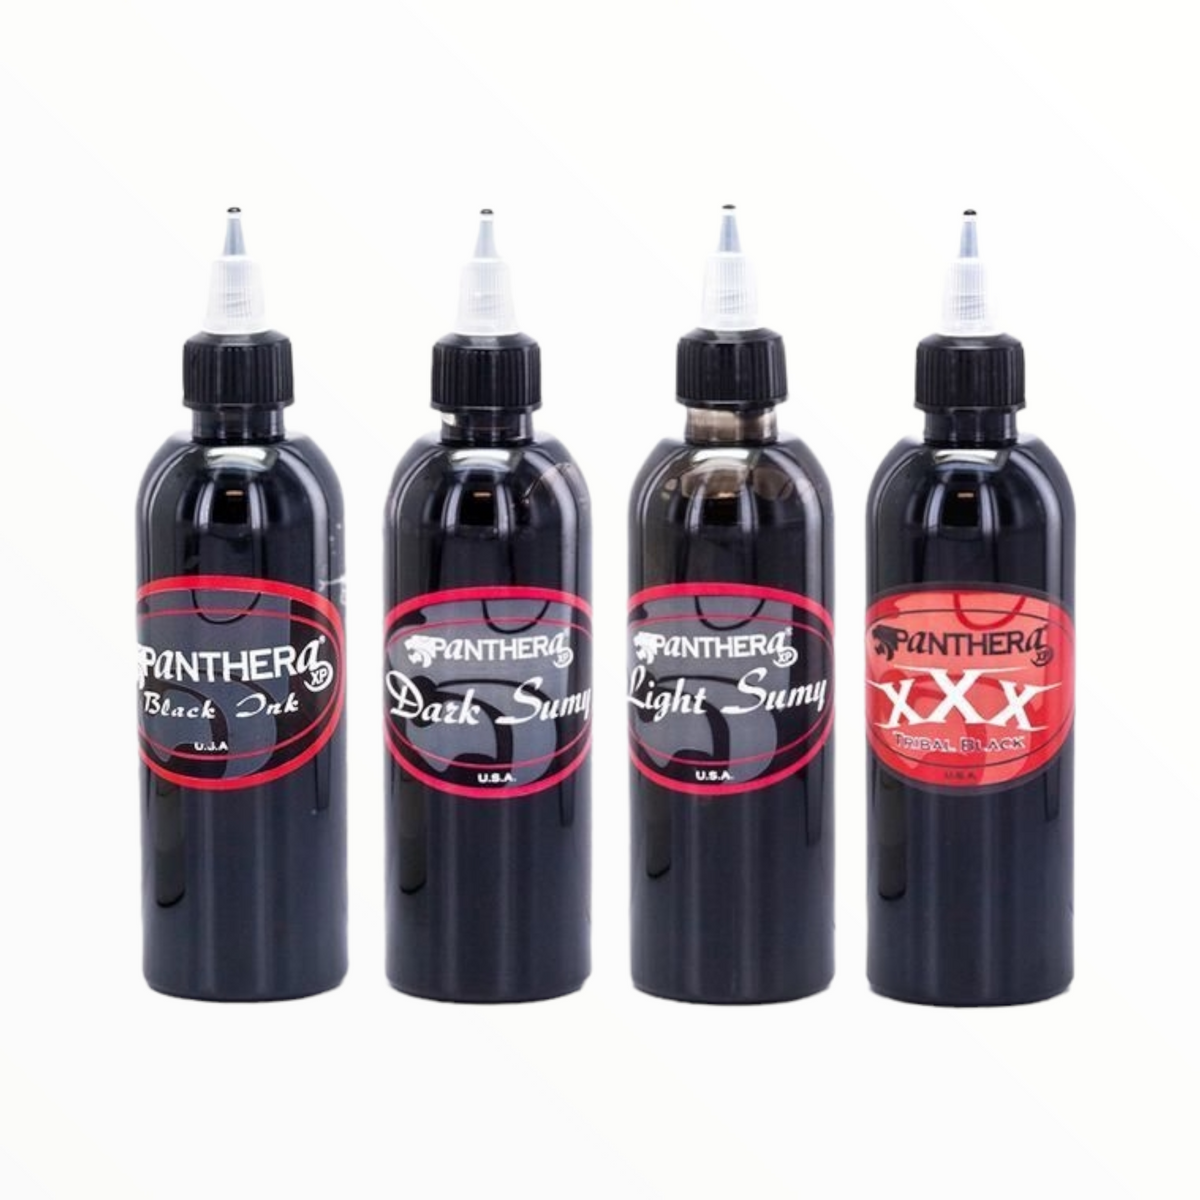 Panthera Dark and Light Sumy Ink  Barber DTS  Tattoo Supplies